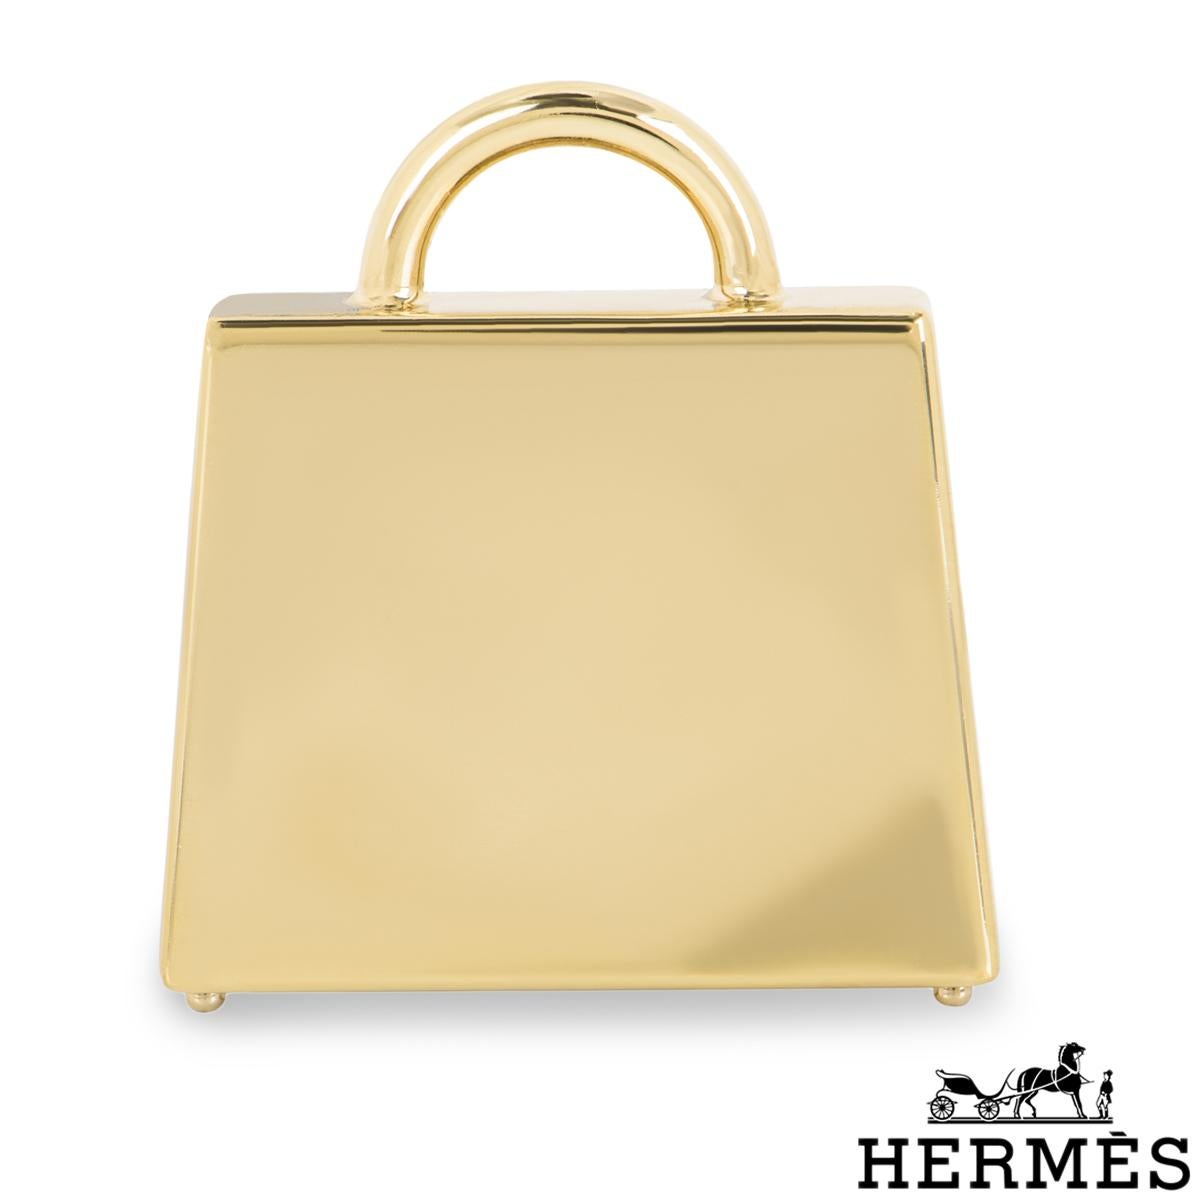 A chic Hermès Kelly Bag charm. The charm features a Curiosite Noir Laque Kelly motif with permabrass plated hardware. This versatile charm can be worn as a pendant or on an Hermès Twilly as a charm.

The charm measures 28mm L X 30mm H X 7.5mm